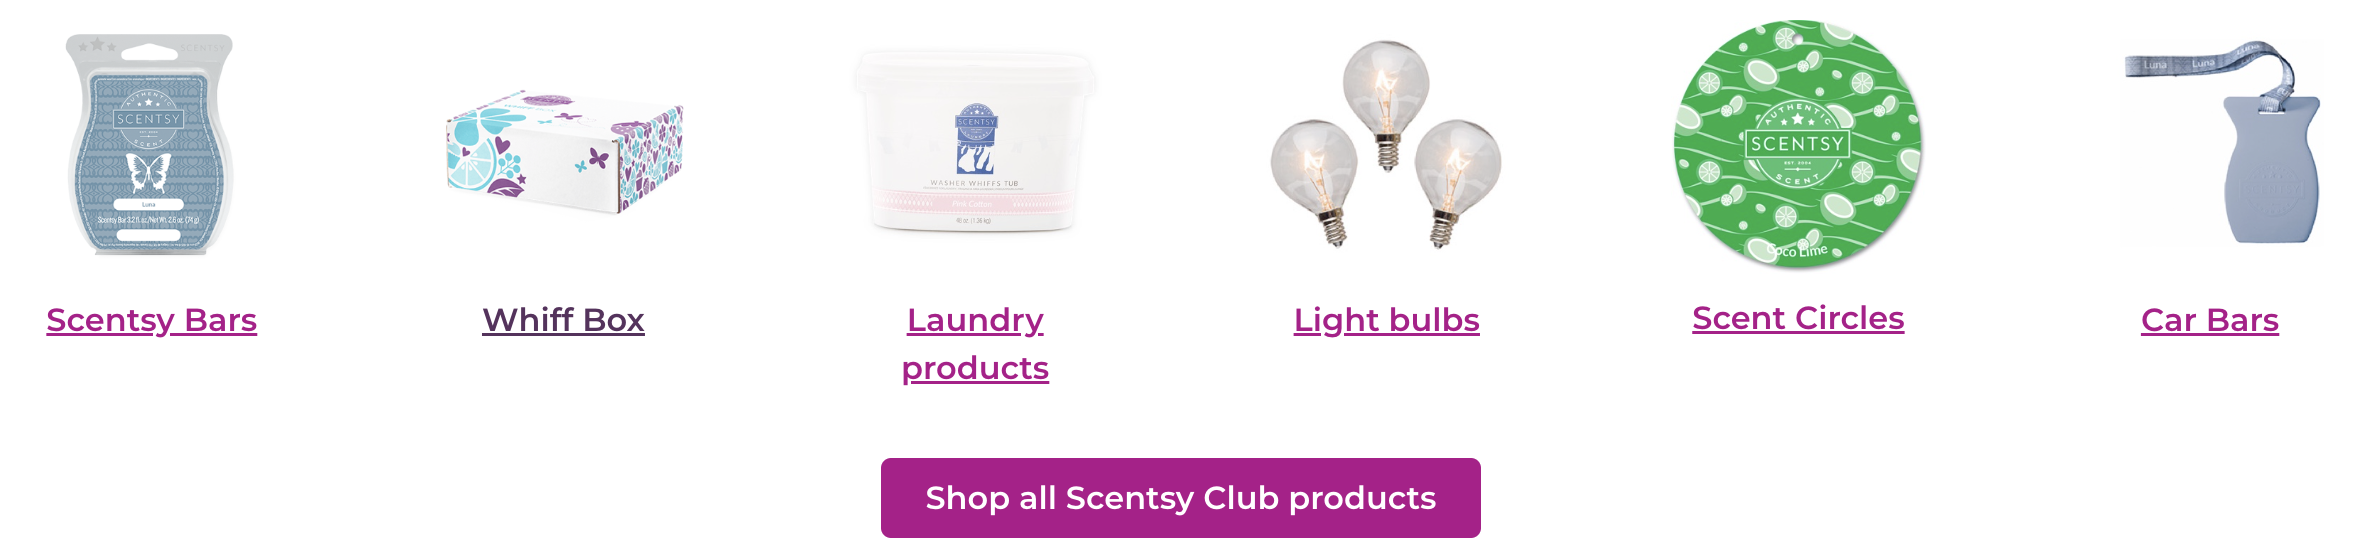 Scentsy Club Most popular Products